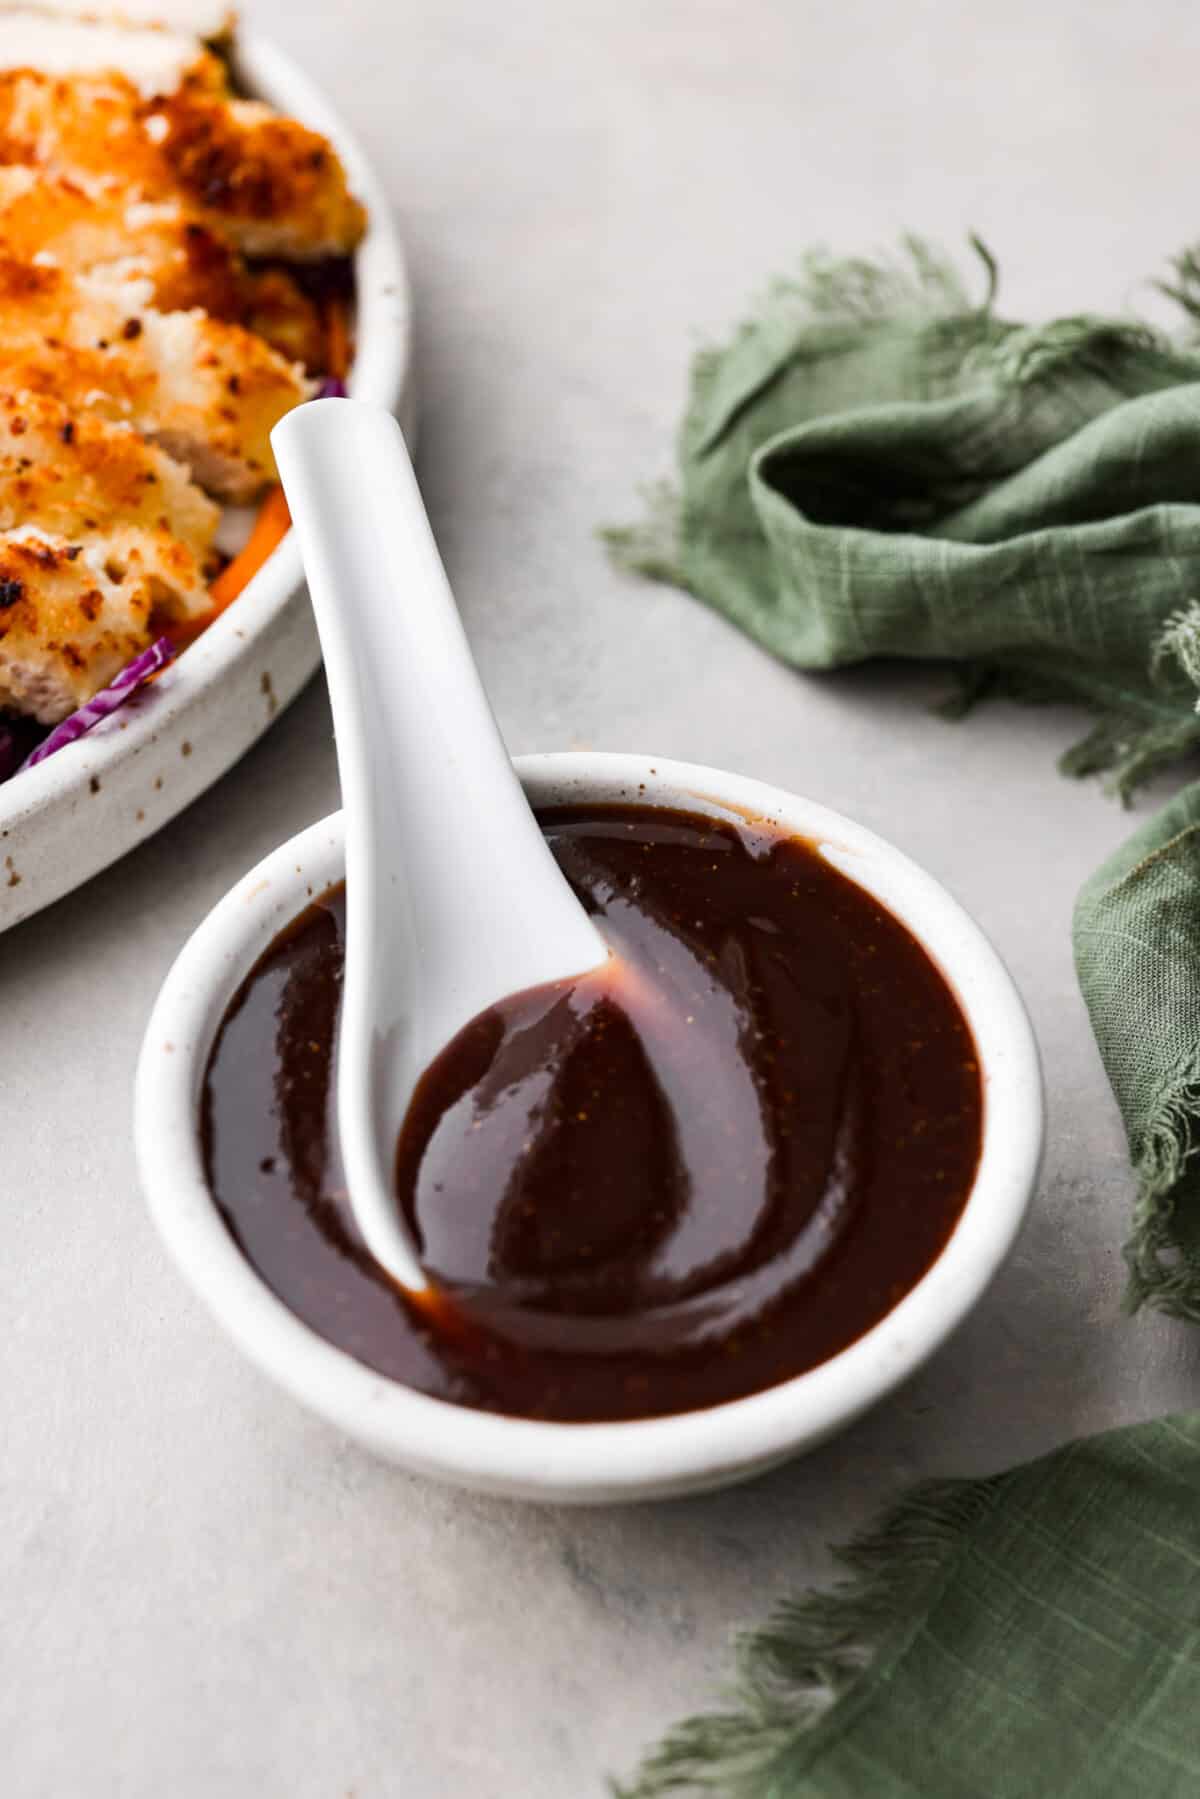 A large white spoon inside a small bowl of katsu sauce.